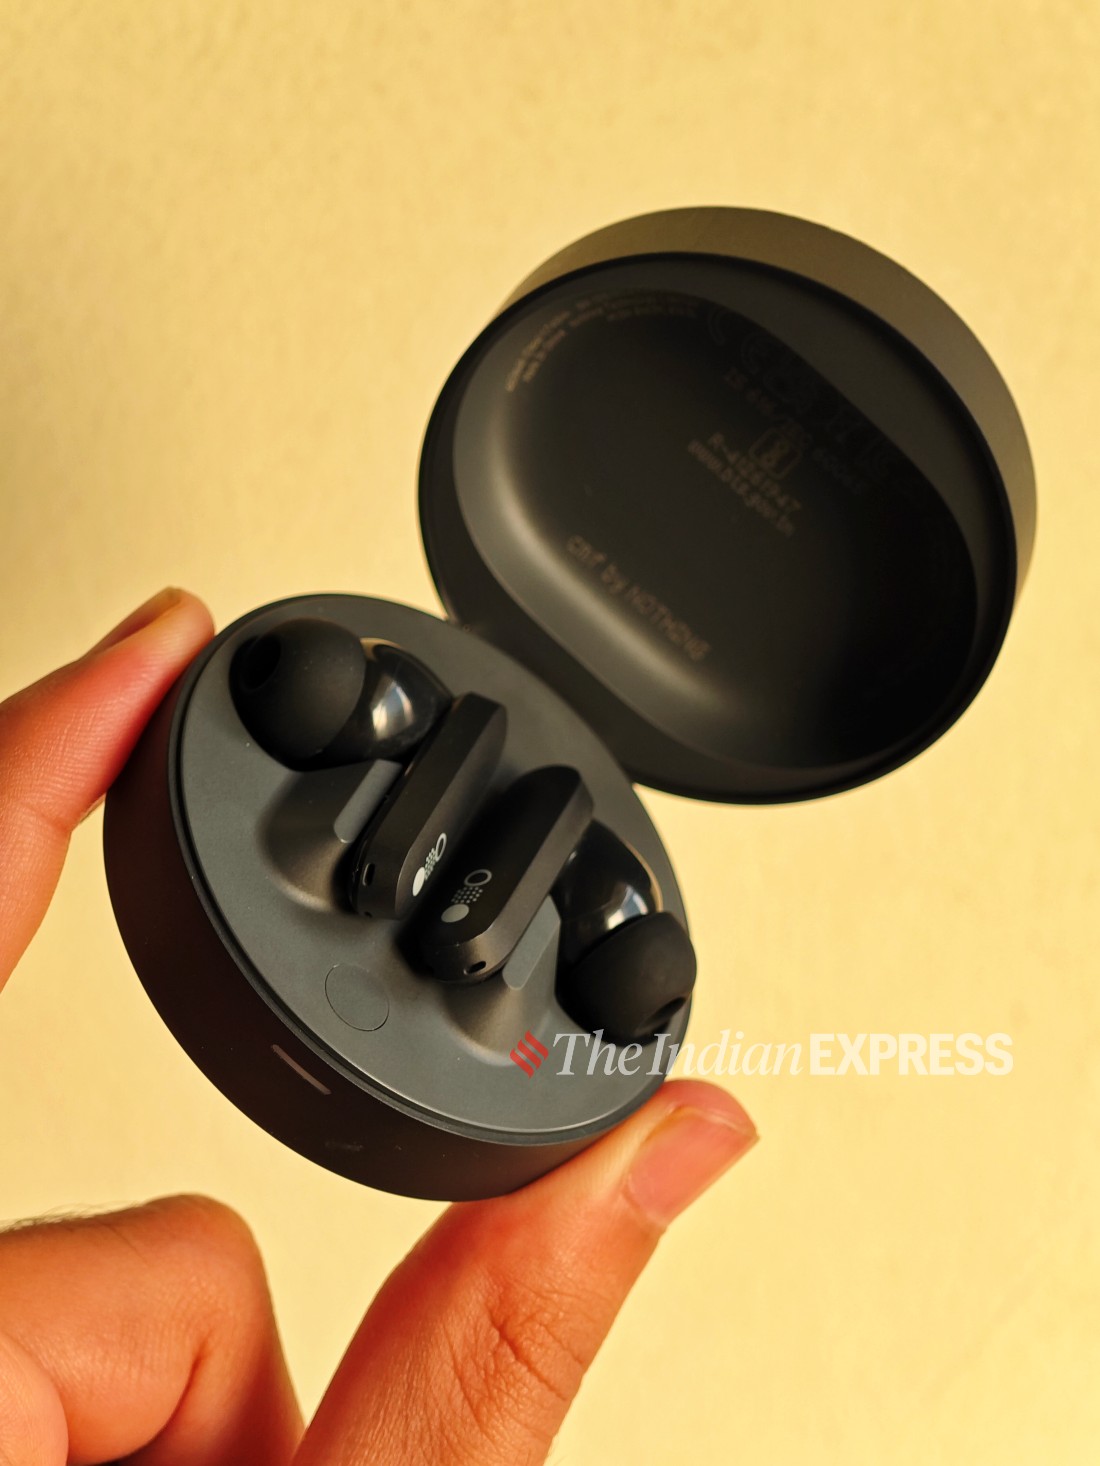 CMF by Nothing Buds Pro review: One of the best wireless earbuds under Rs  5,000 - India Today